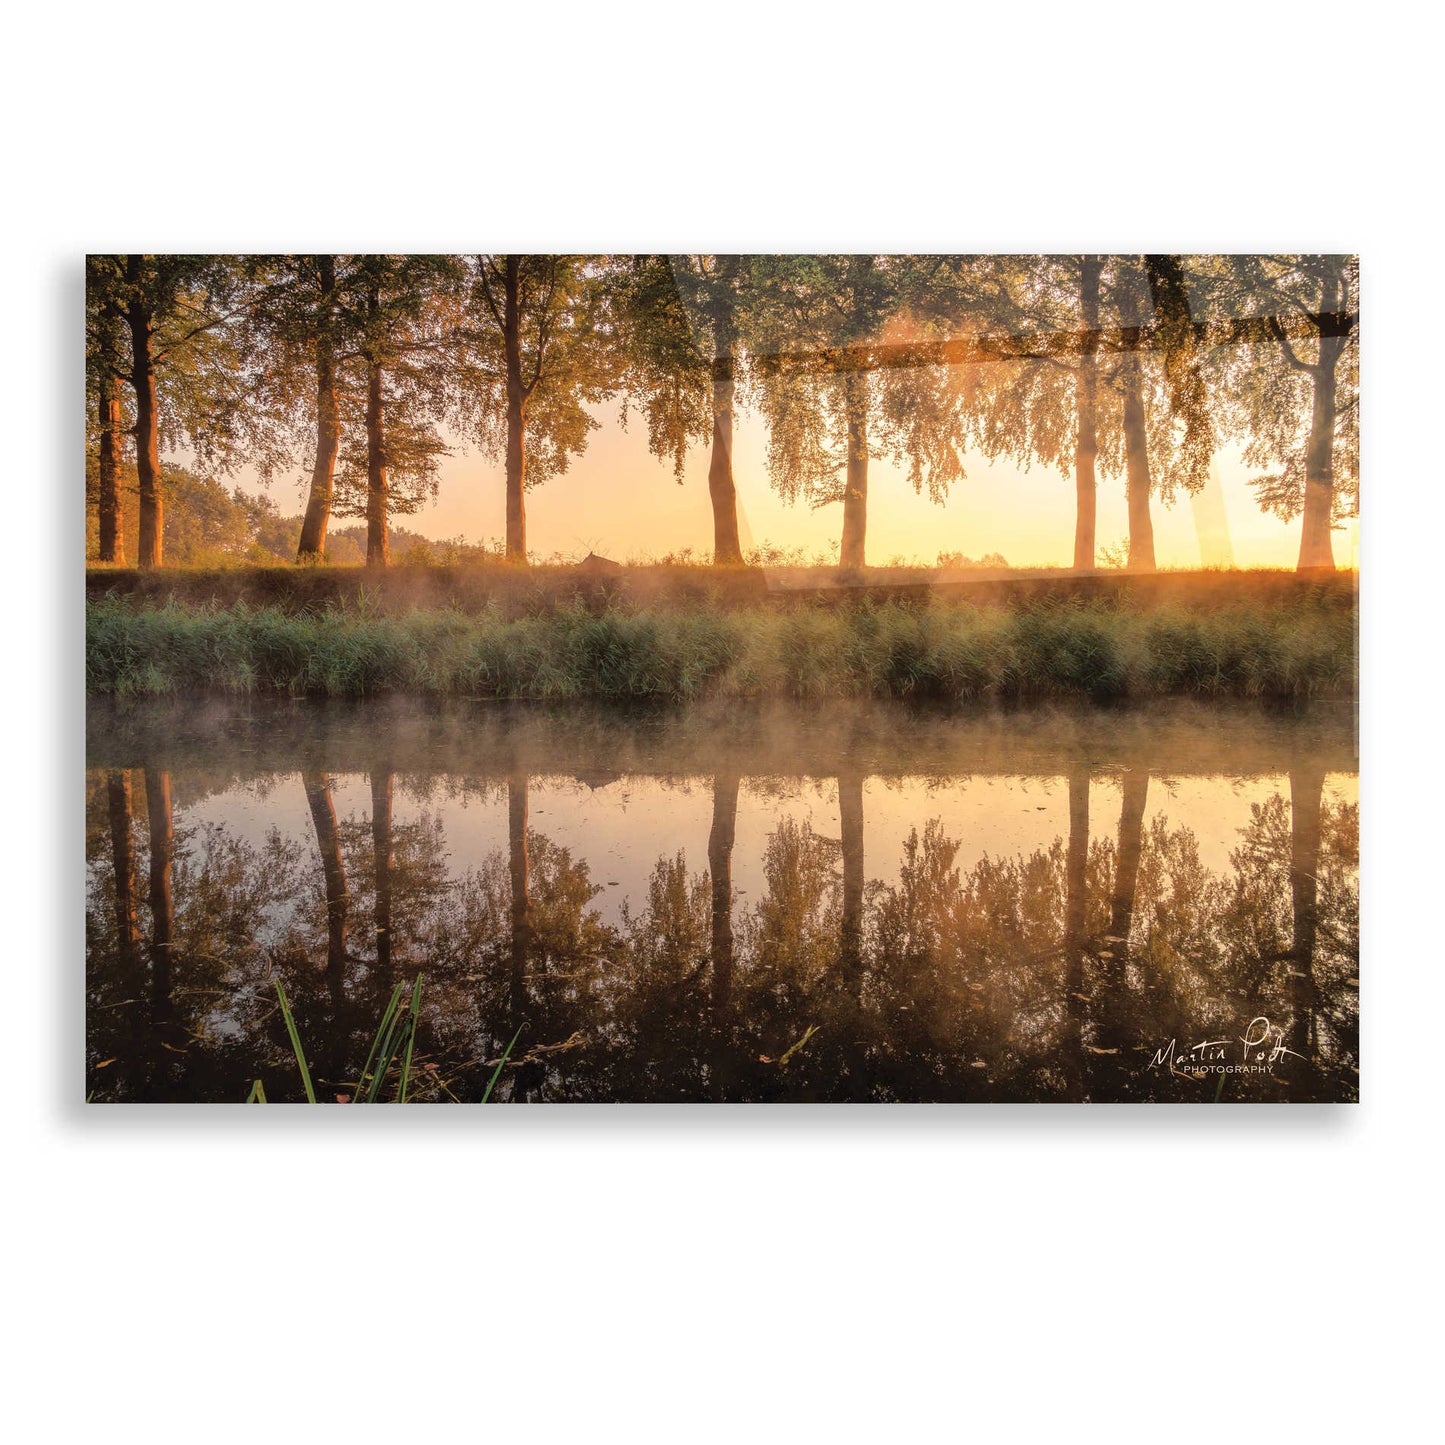 Epic Art 'Sunrise in the Netherlands' by Martin Podt, Acrylic Glass Wall Art,24x16